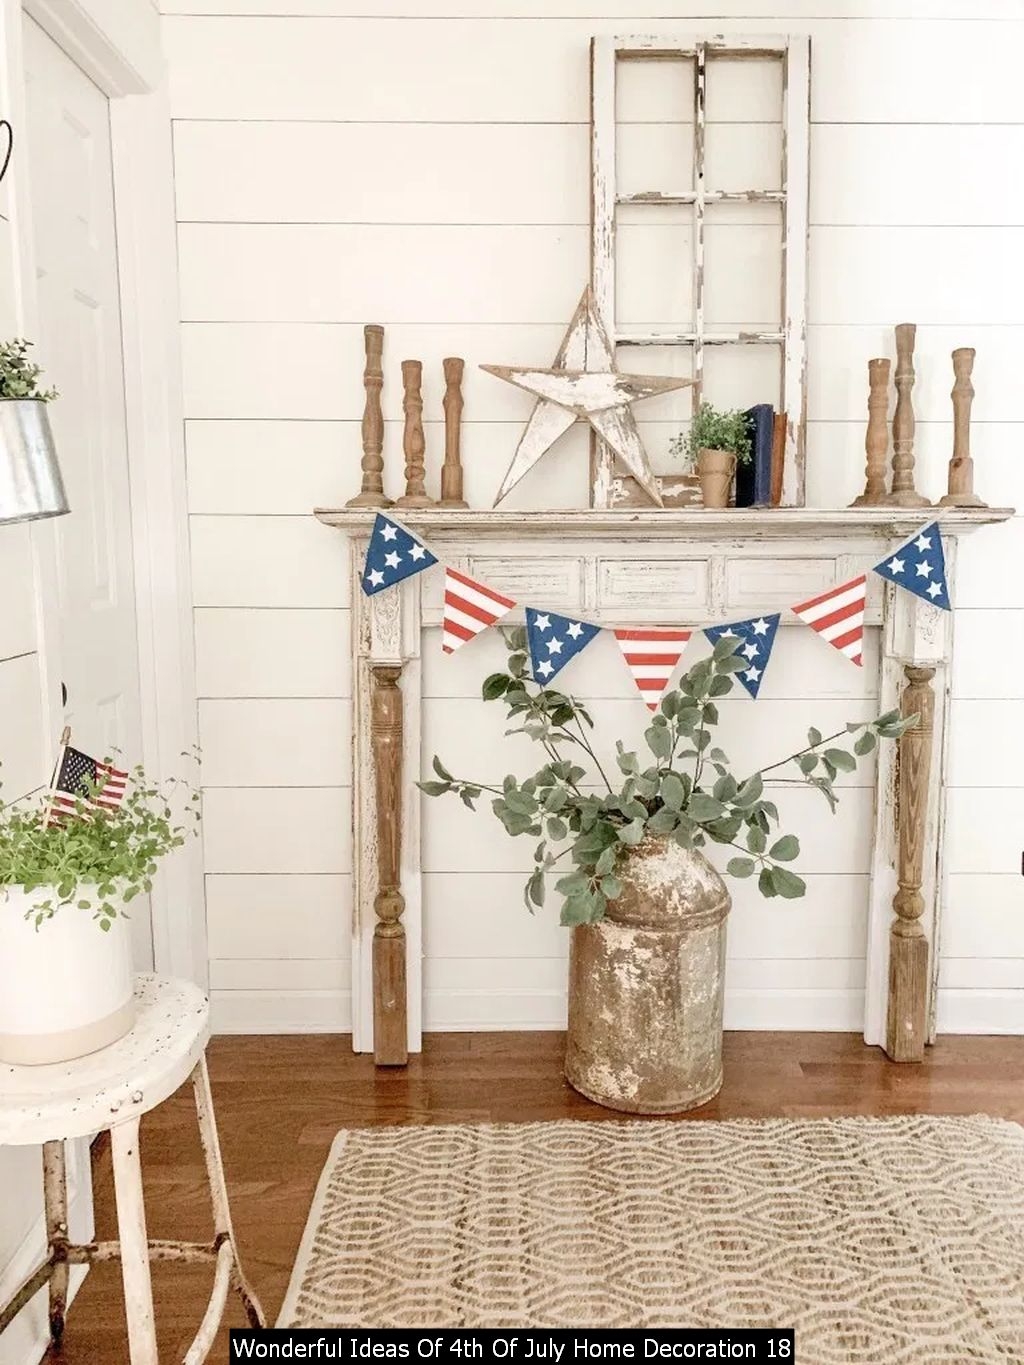 Wonderful Ideas Of 4th Of July Home Decoration 18